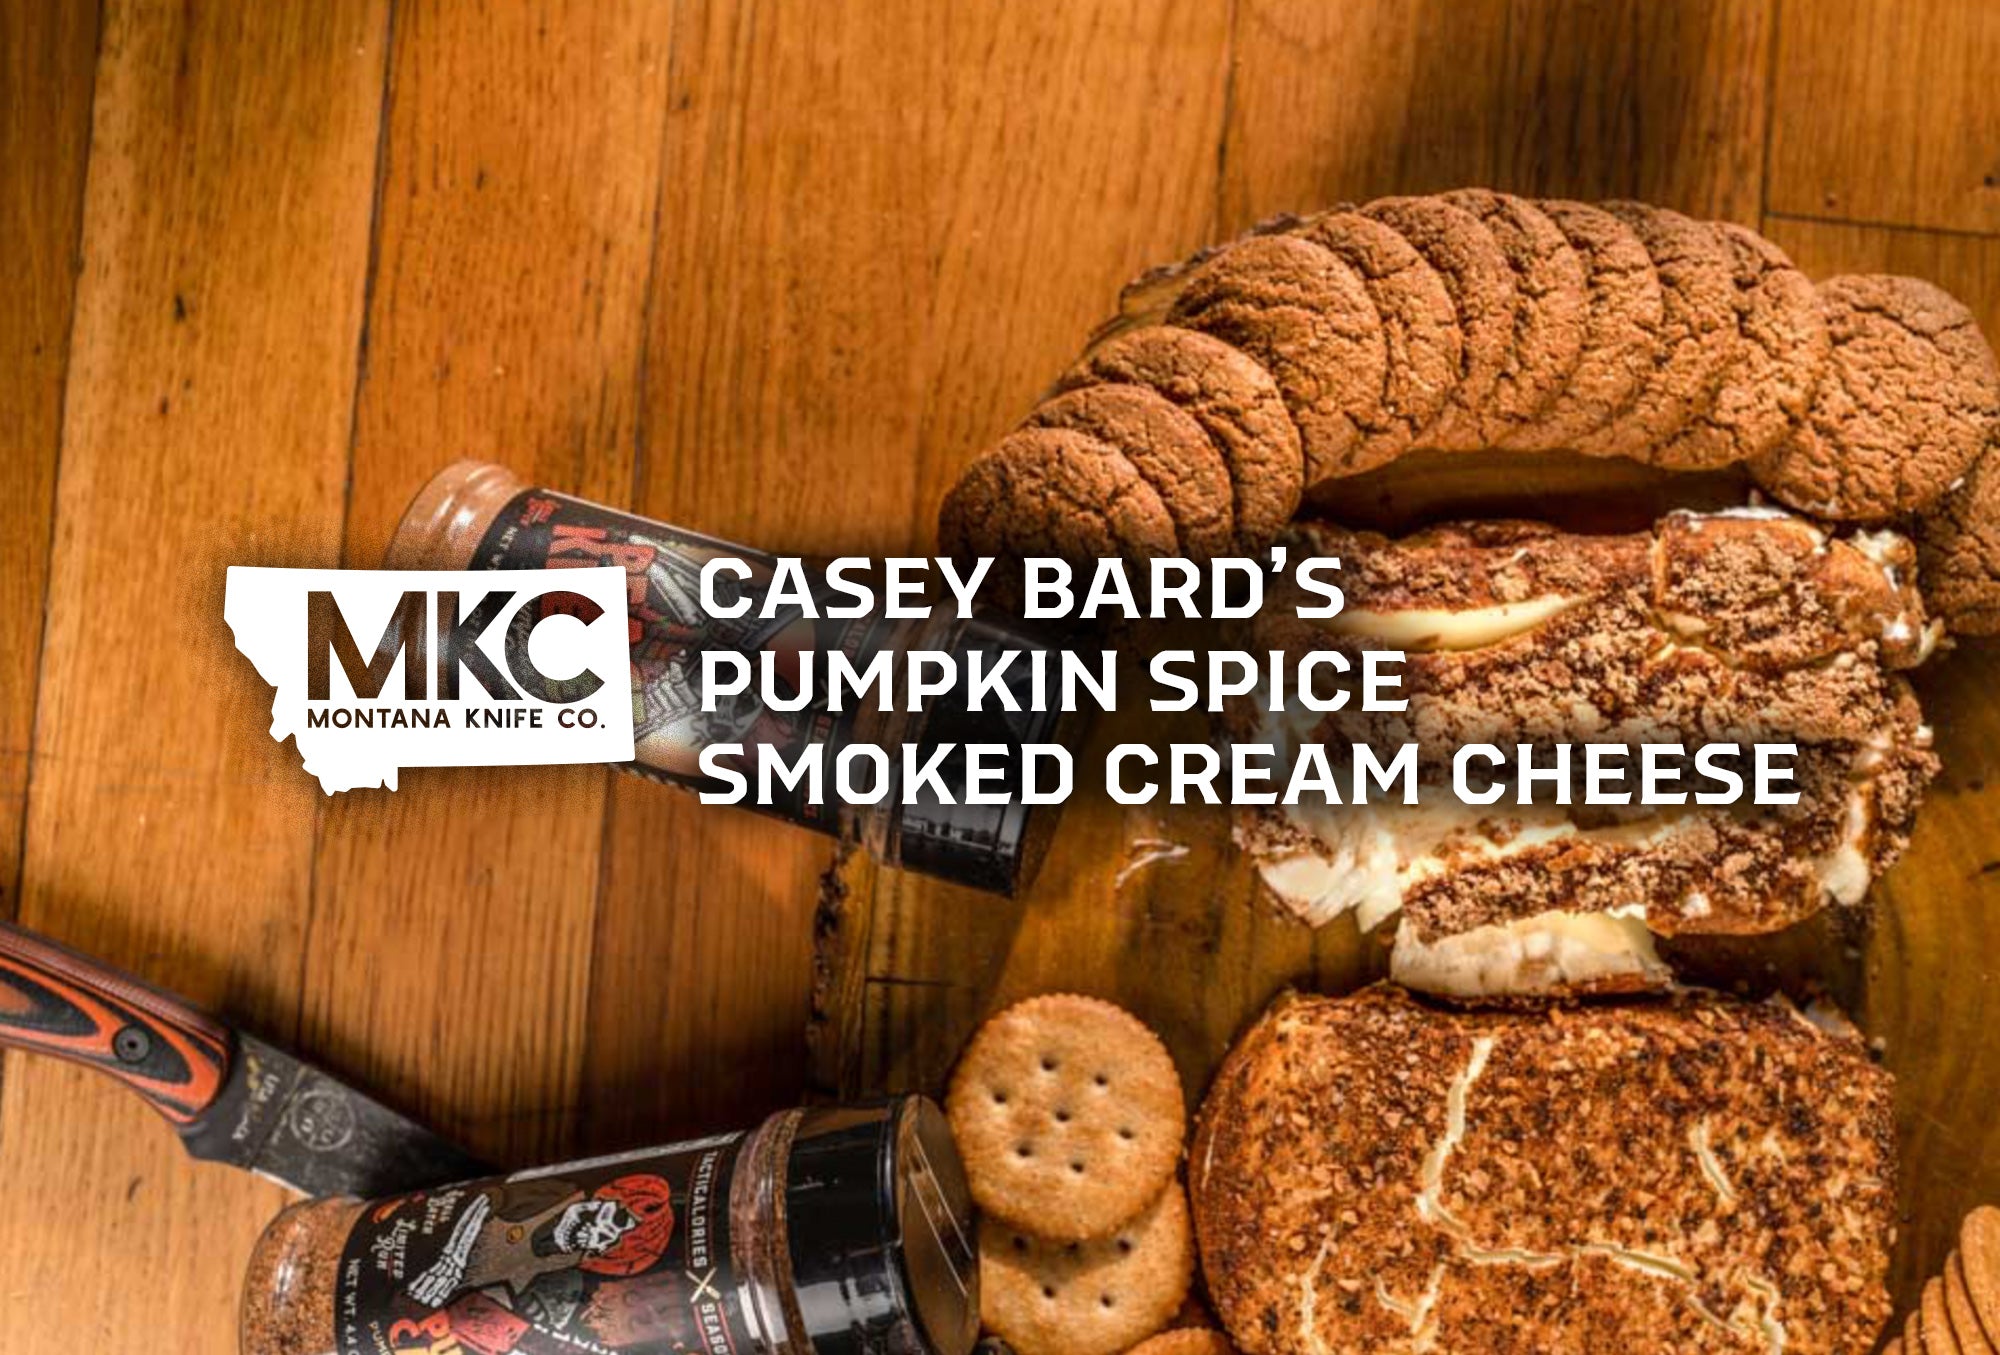 Two bricks of pumpkin spice smoked cream cheese sit on a wooden table next to ginger snaps, crackers, and spices.